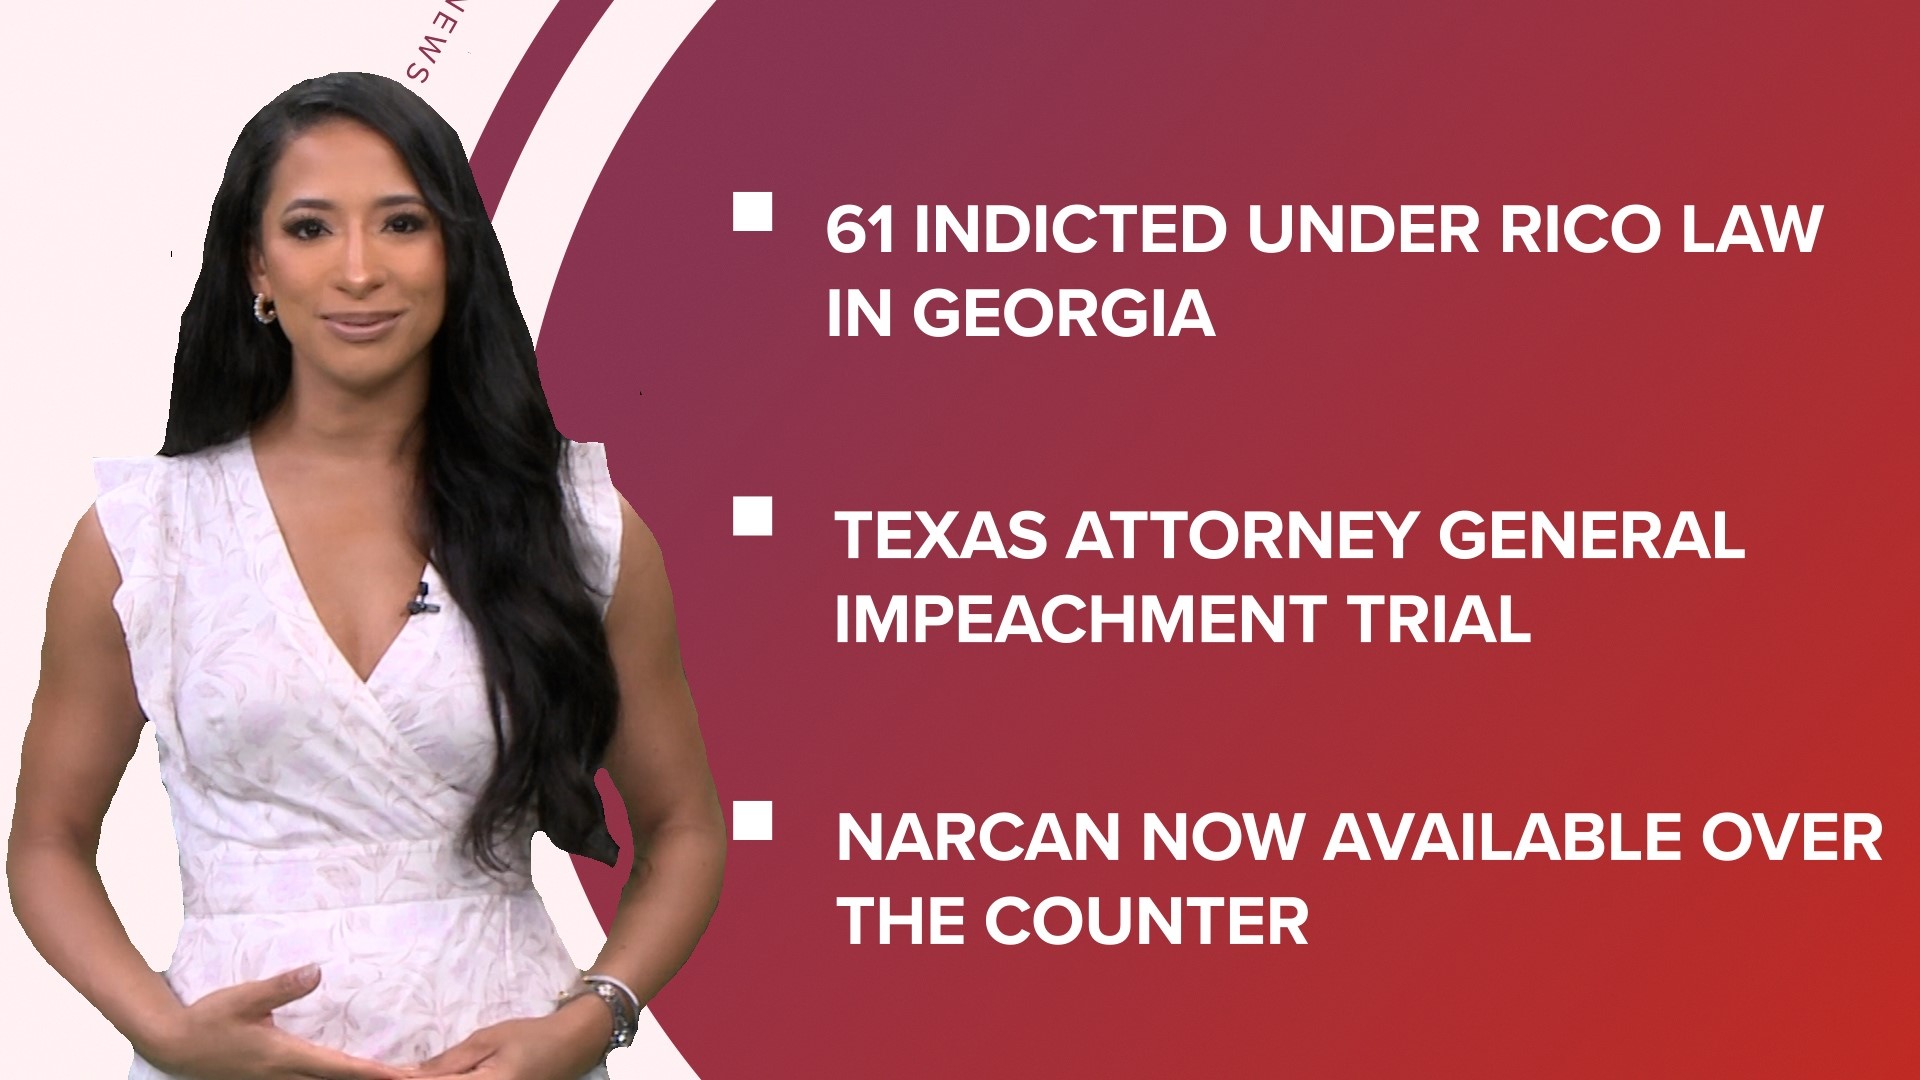 A look at what is happening in the news from 61 indicted in Georgia under RICO law to Narcan available over the counter and Coco Gauff in the US Open semifinals.